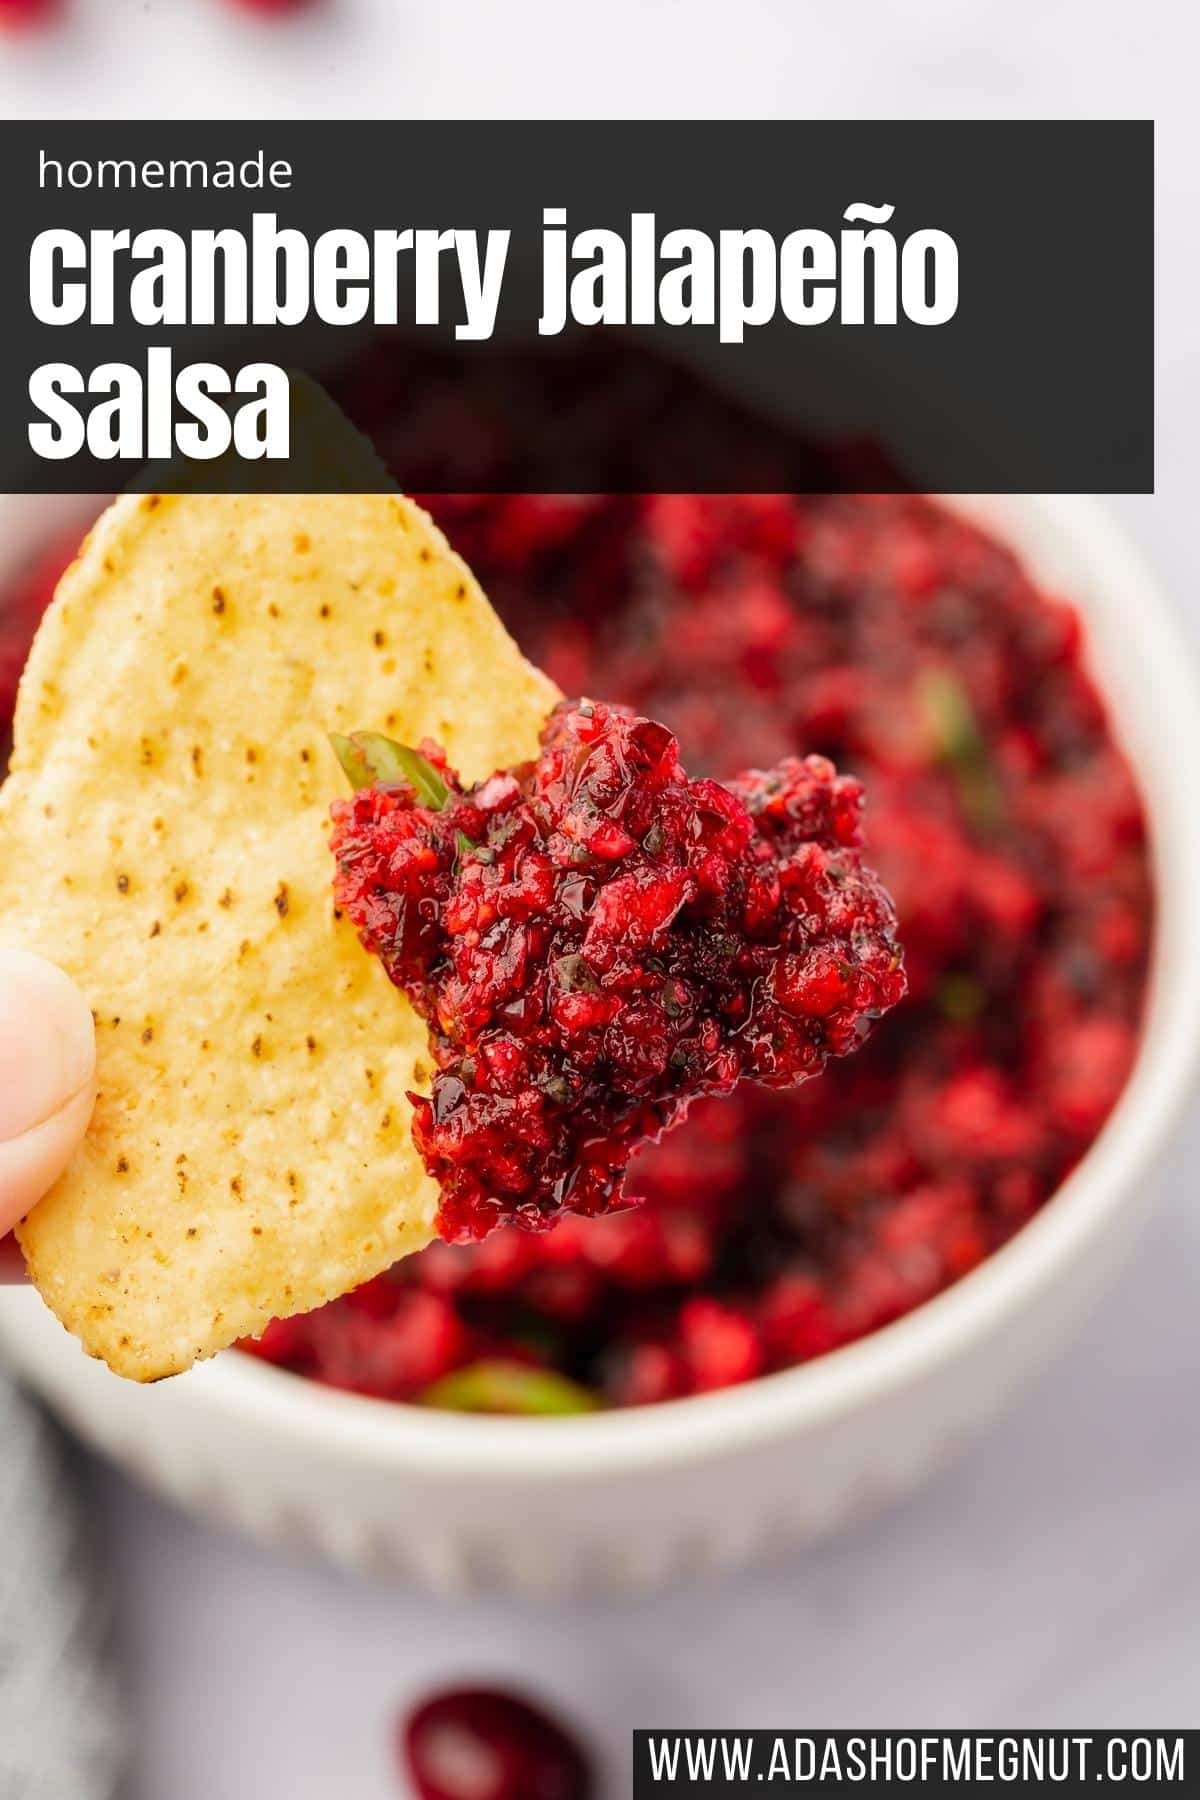 A tortilla chip with a scoop of cranberry salsa on it with a bowl of salsa below it.